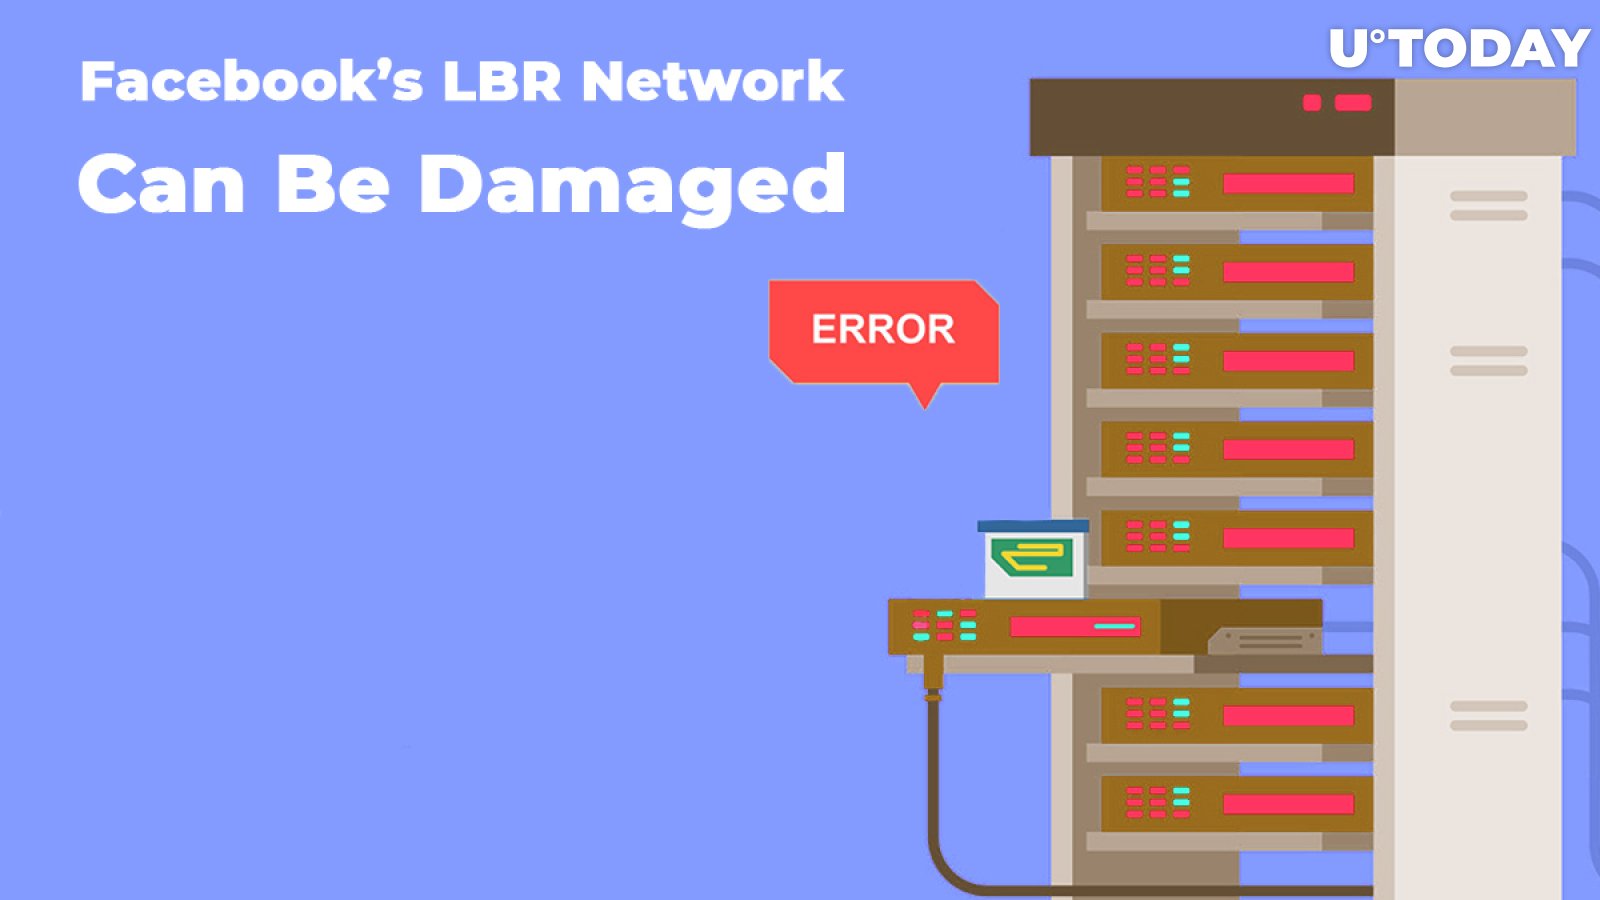 Libra White Paper: Facebook’s LBR Network Can Be Damaged Should 1/3 of Nodes Fail